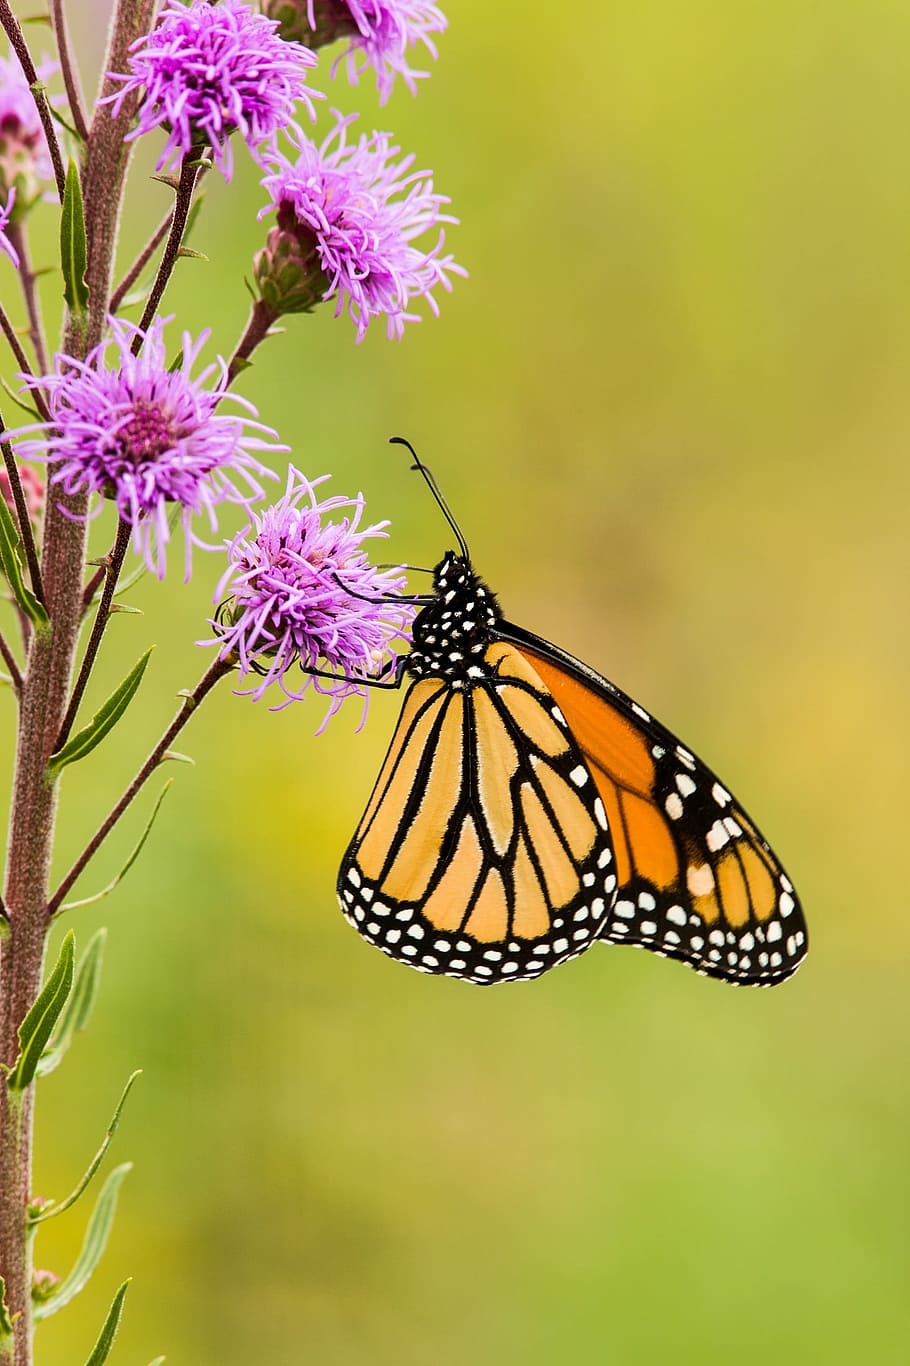 African Monarch butterfly perched on purple cluster flower in close-up photography during daytime